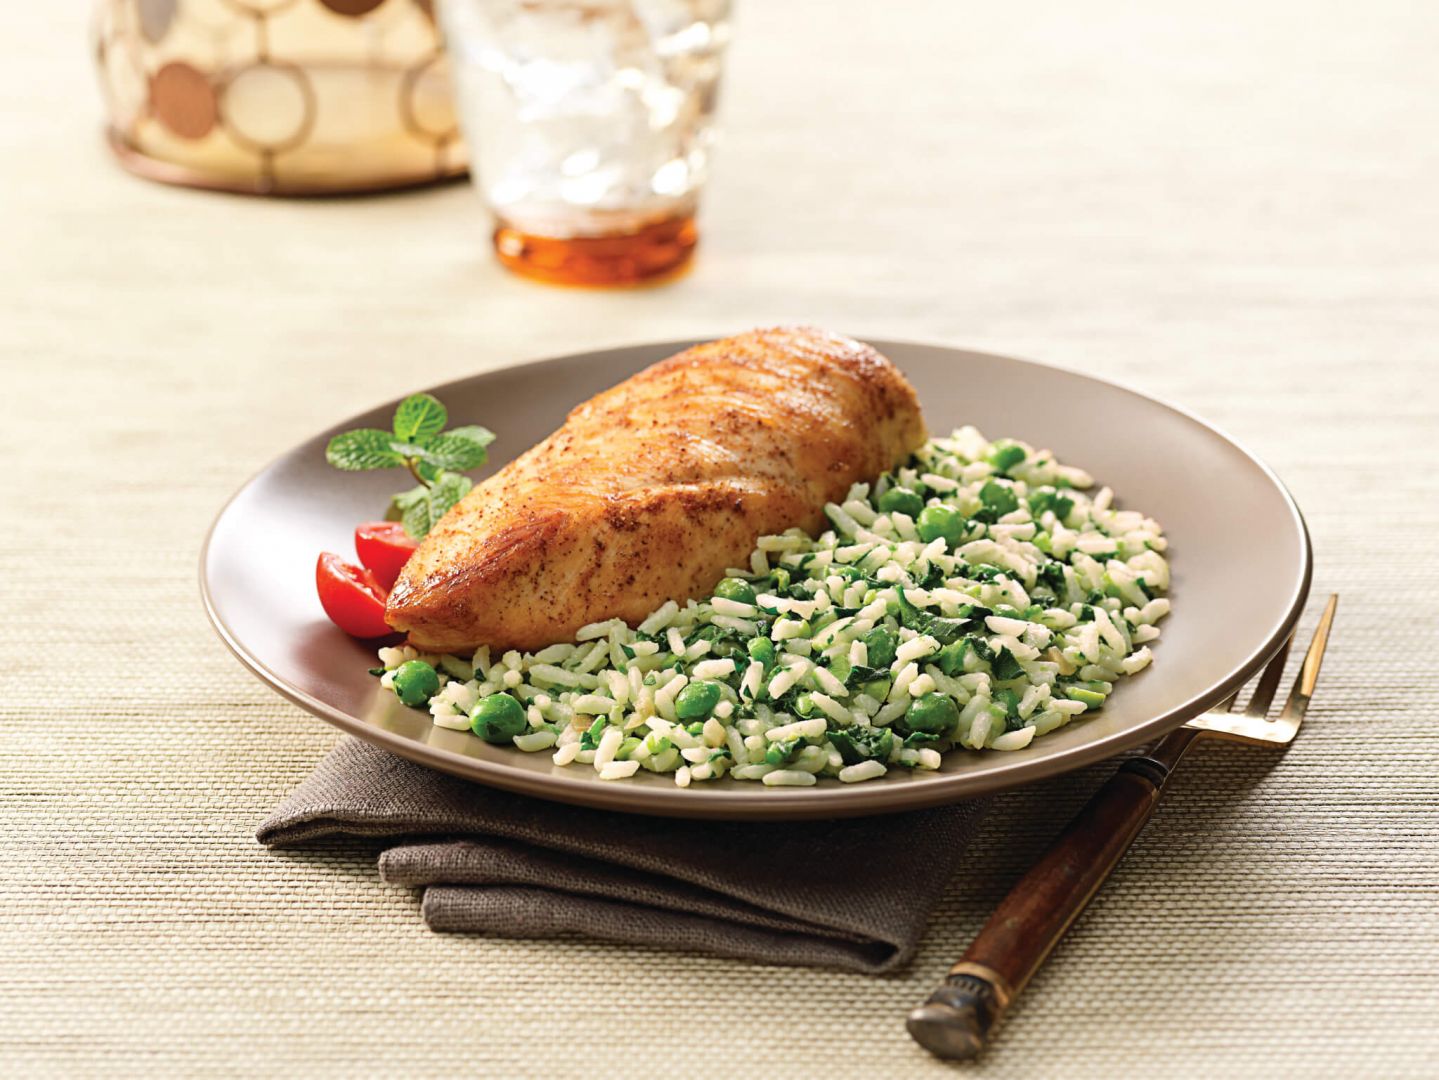 5-Spice Chicken with Minted Rice